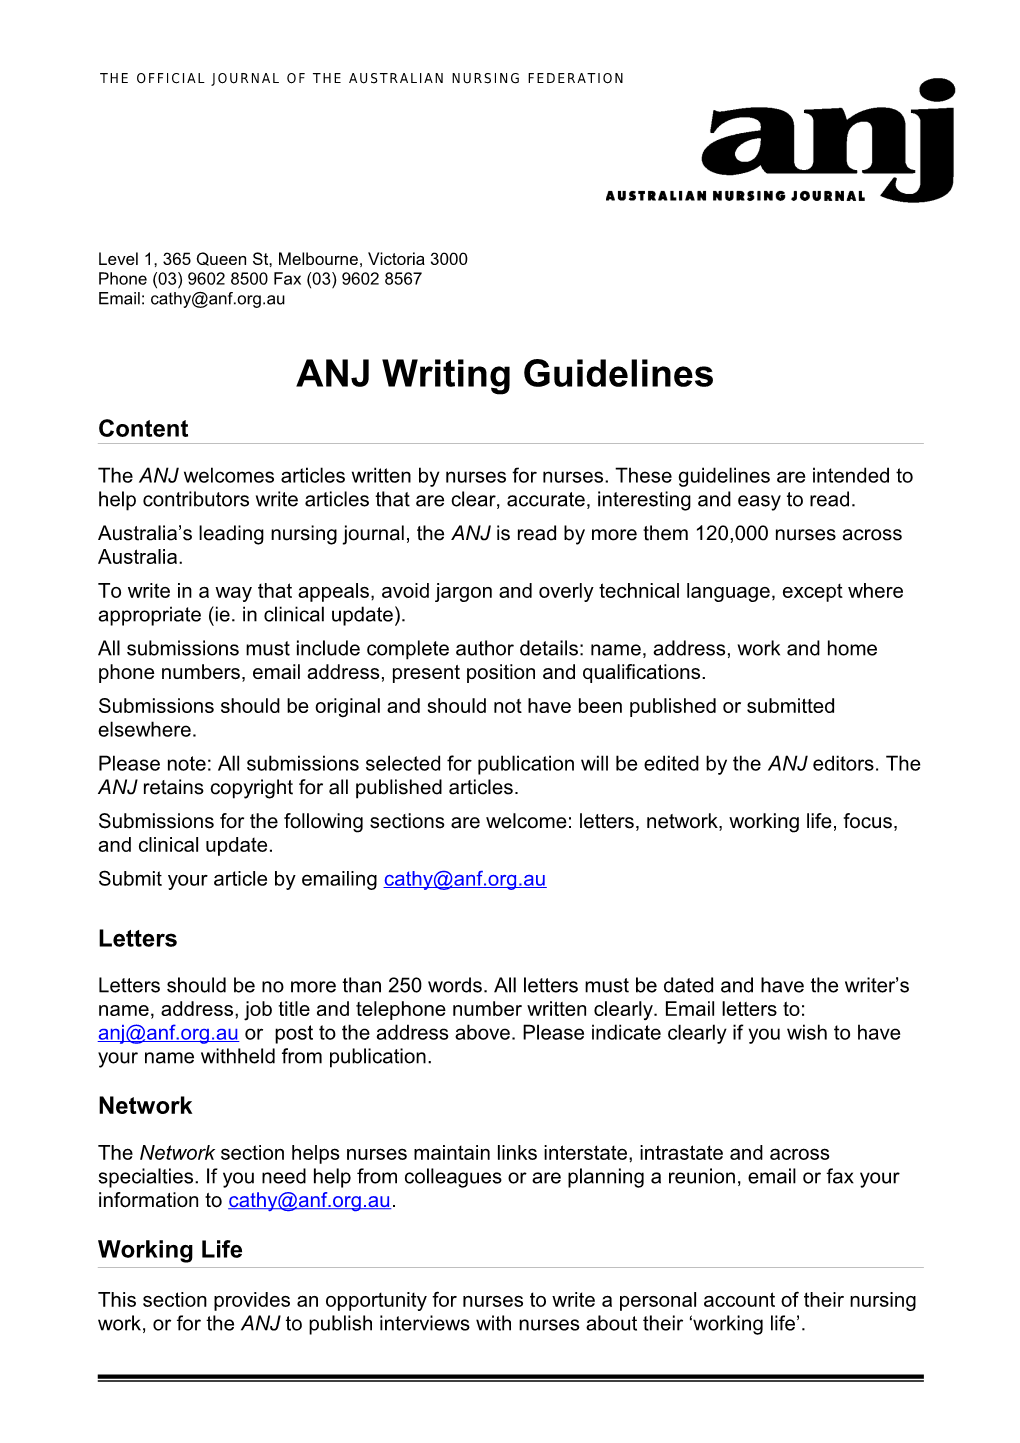 The Official Journal of the Australian Nursing Federation